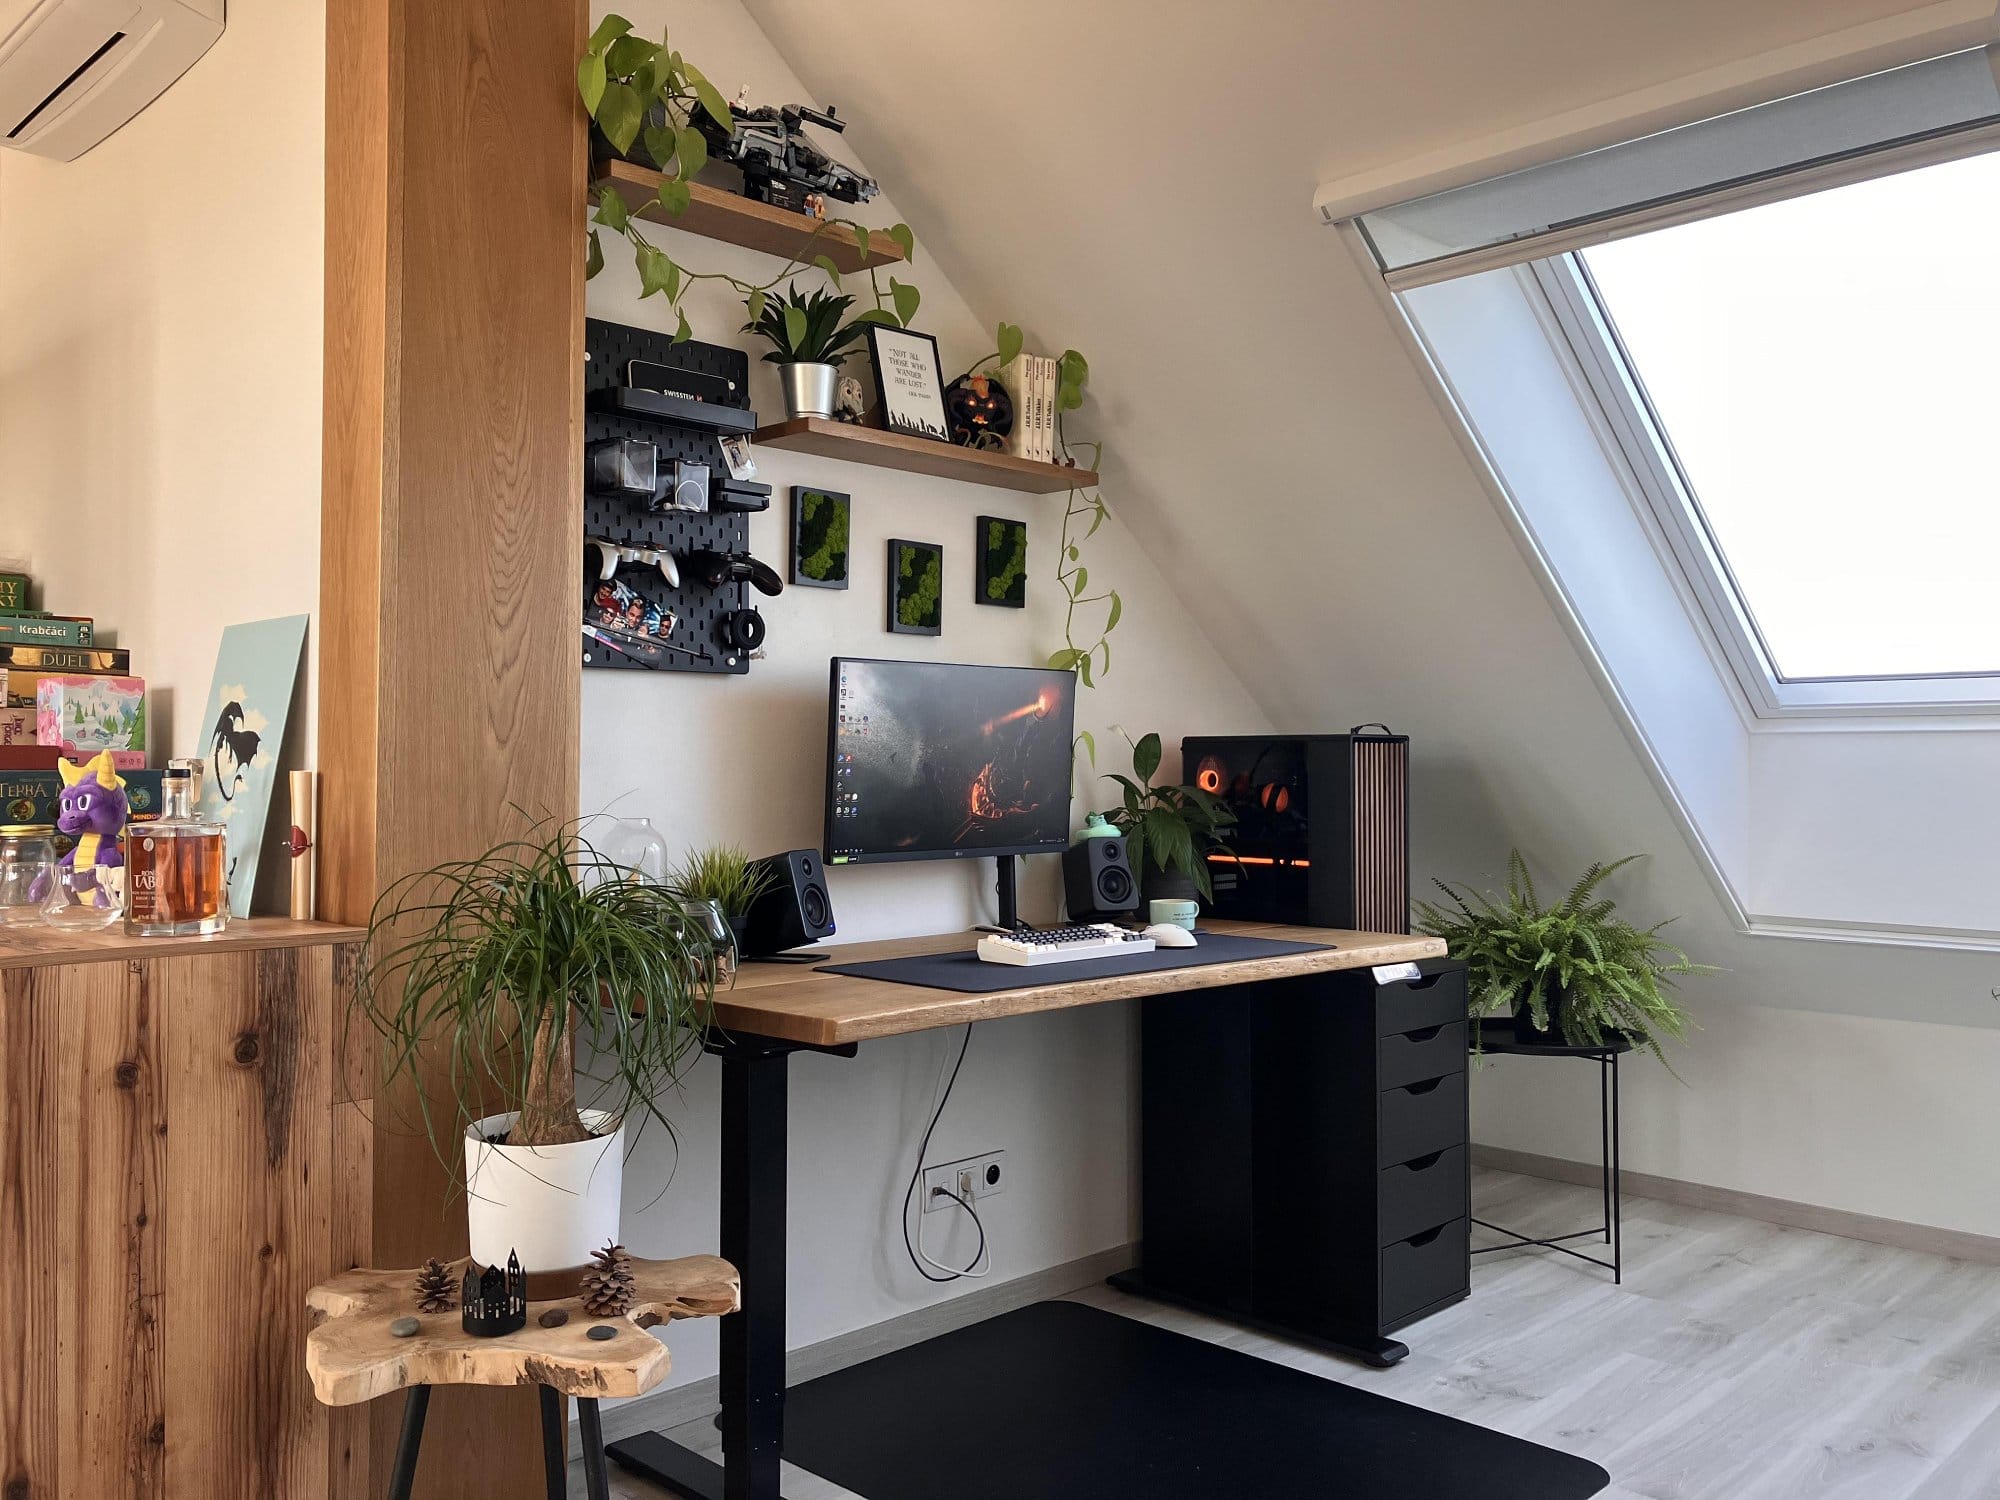 A stylish home office featuring a wooden desk with an ergonomic chair, computer setup, and multiple plants, illuminated by natural light from a large window